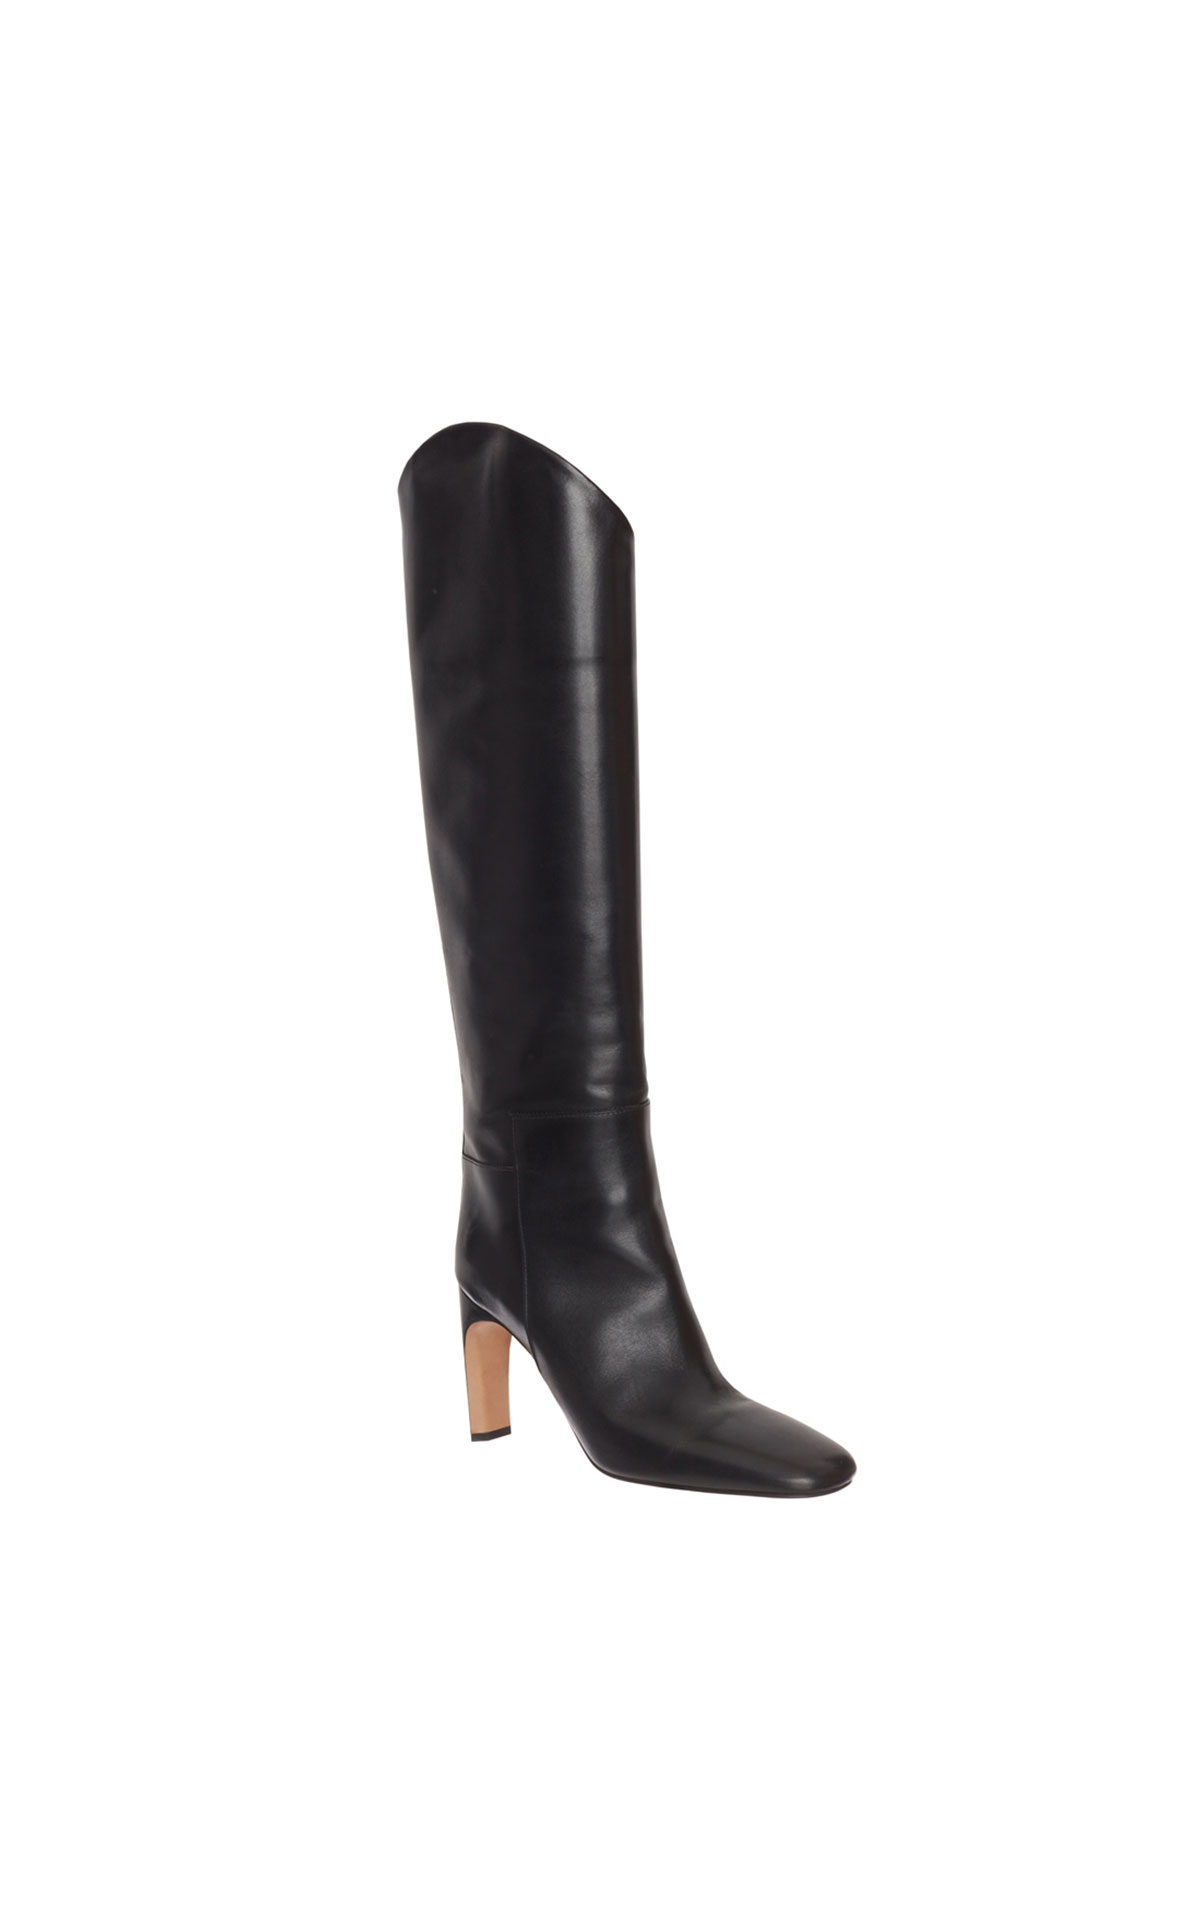 Jil Sander Tall leather boot from Bicester Village